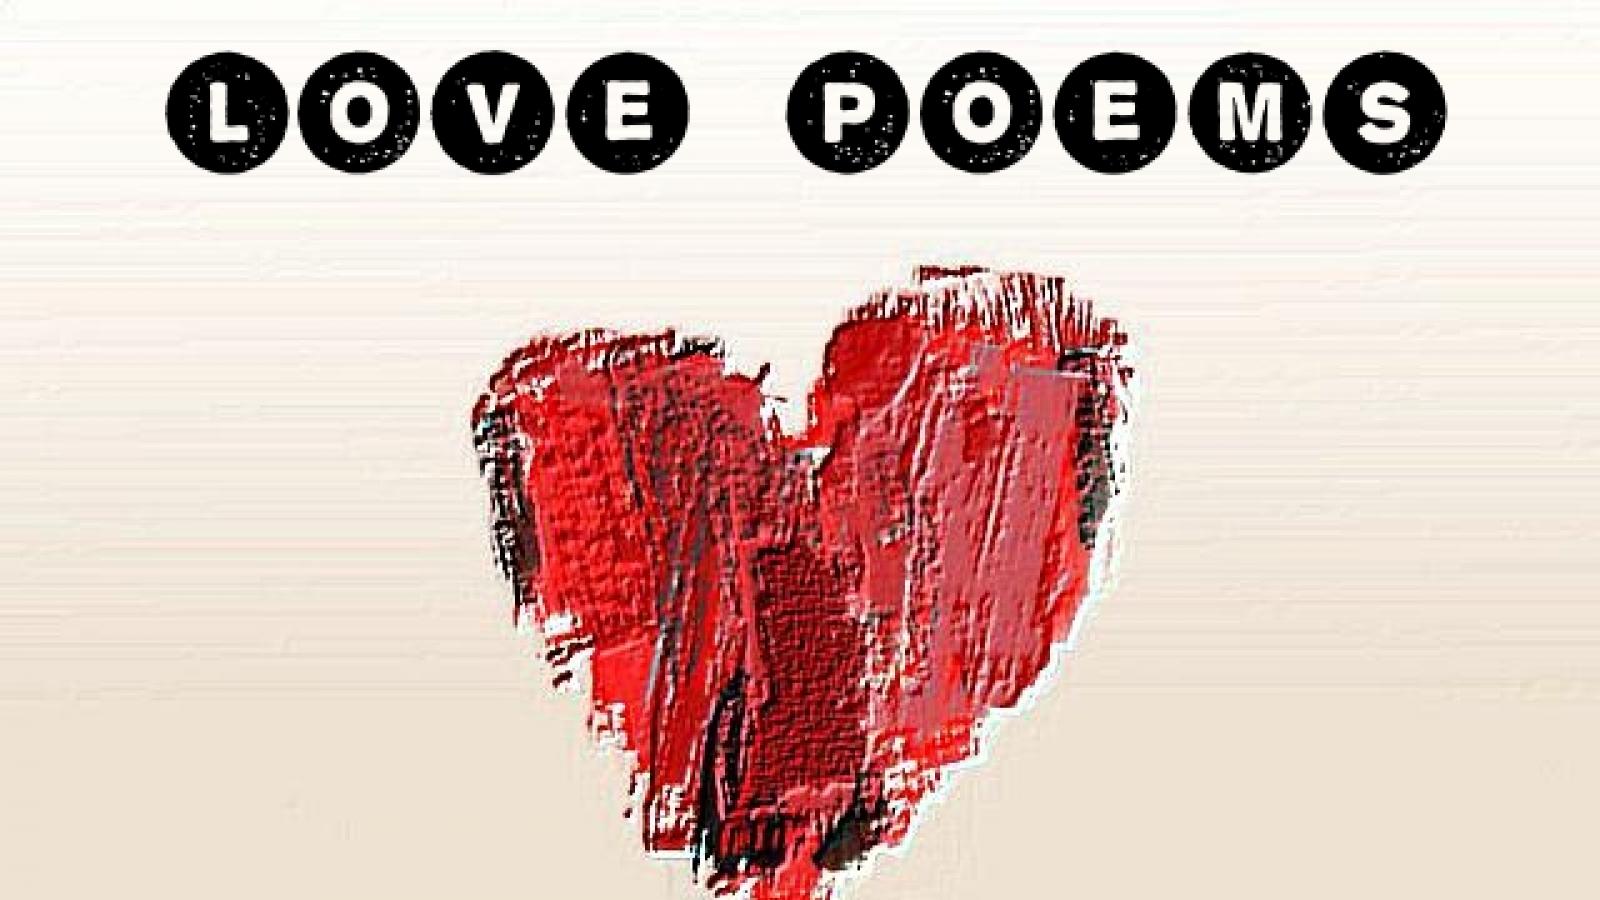 Painted image of heart with text "Love Poems"